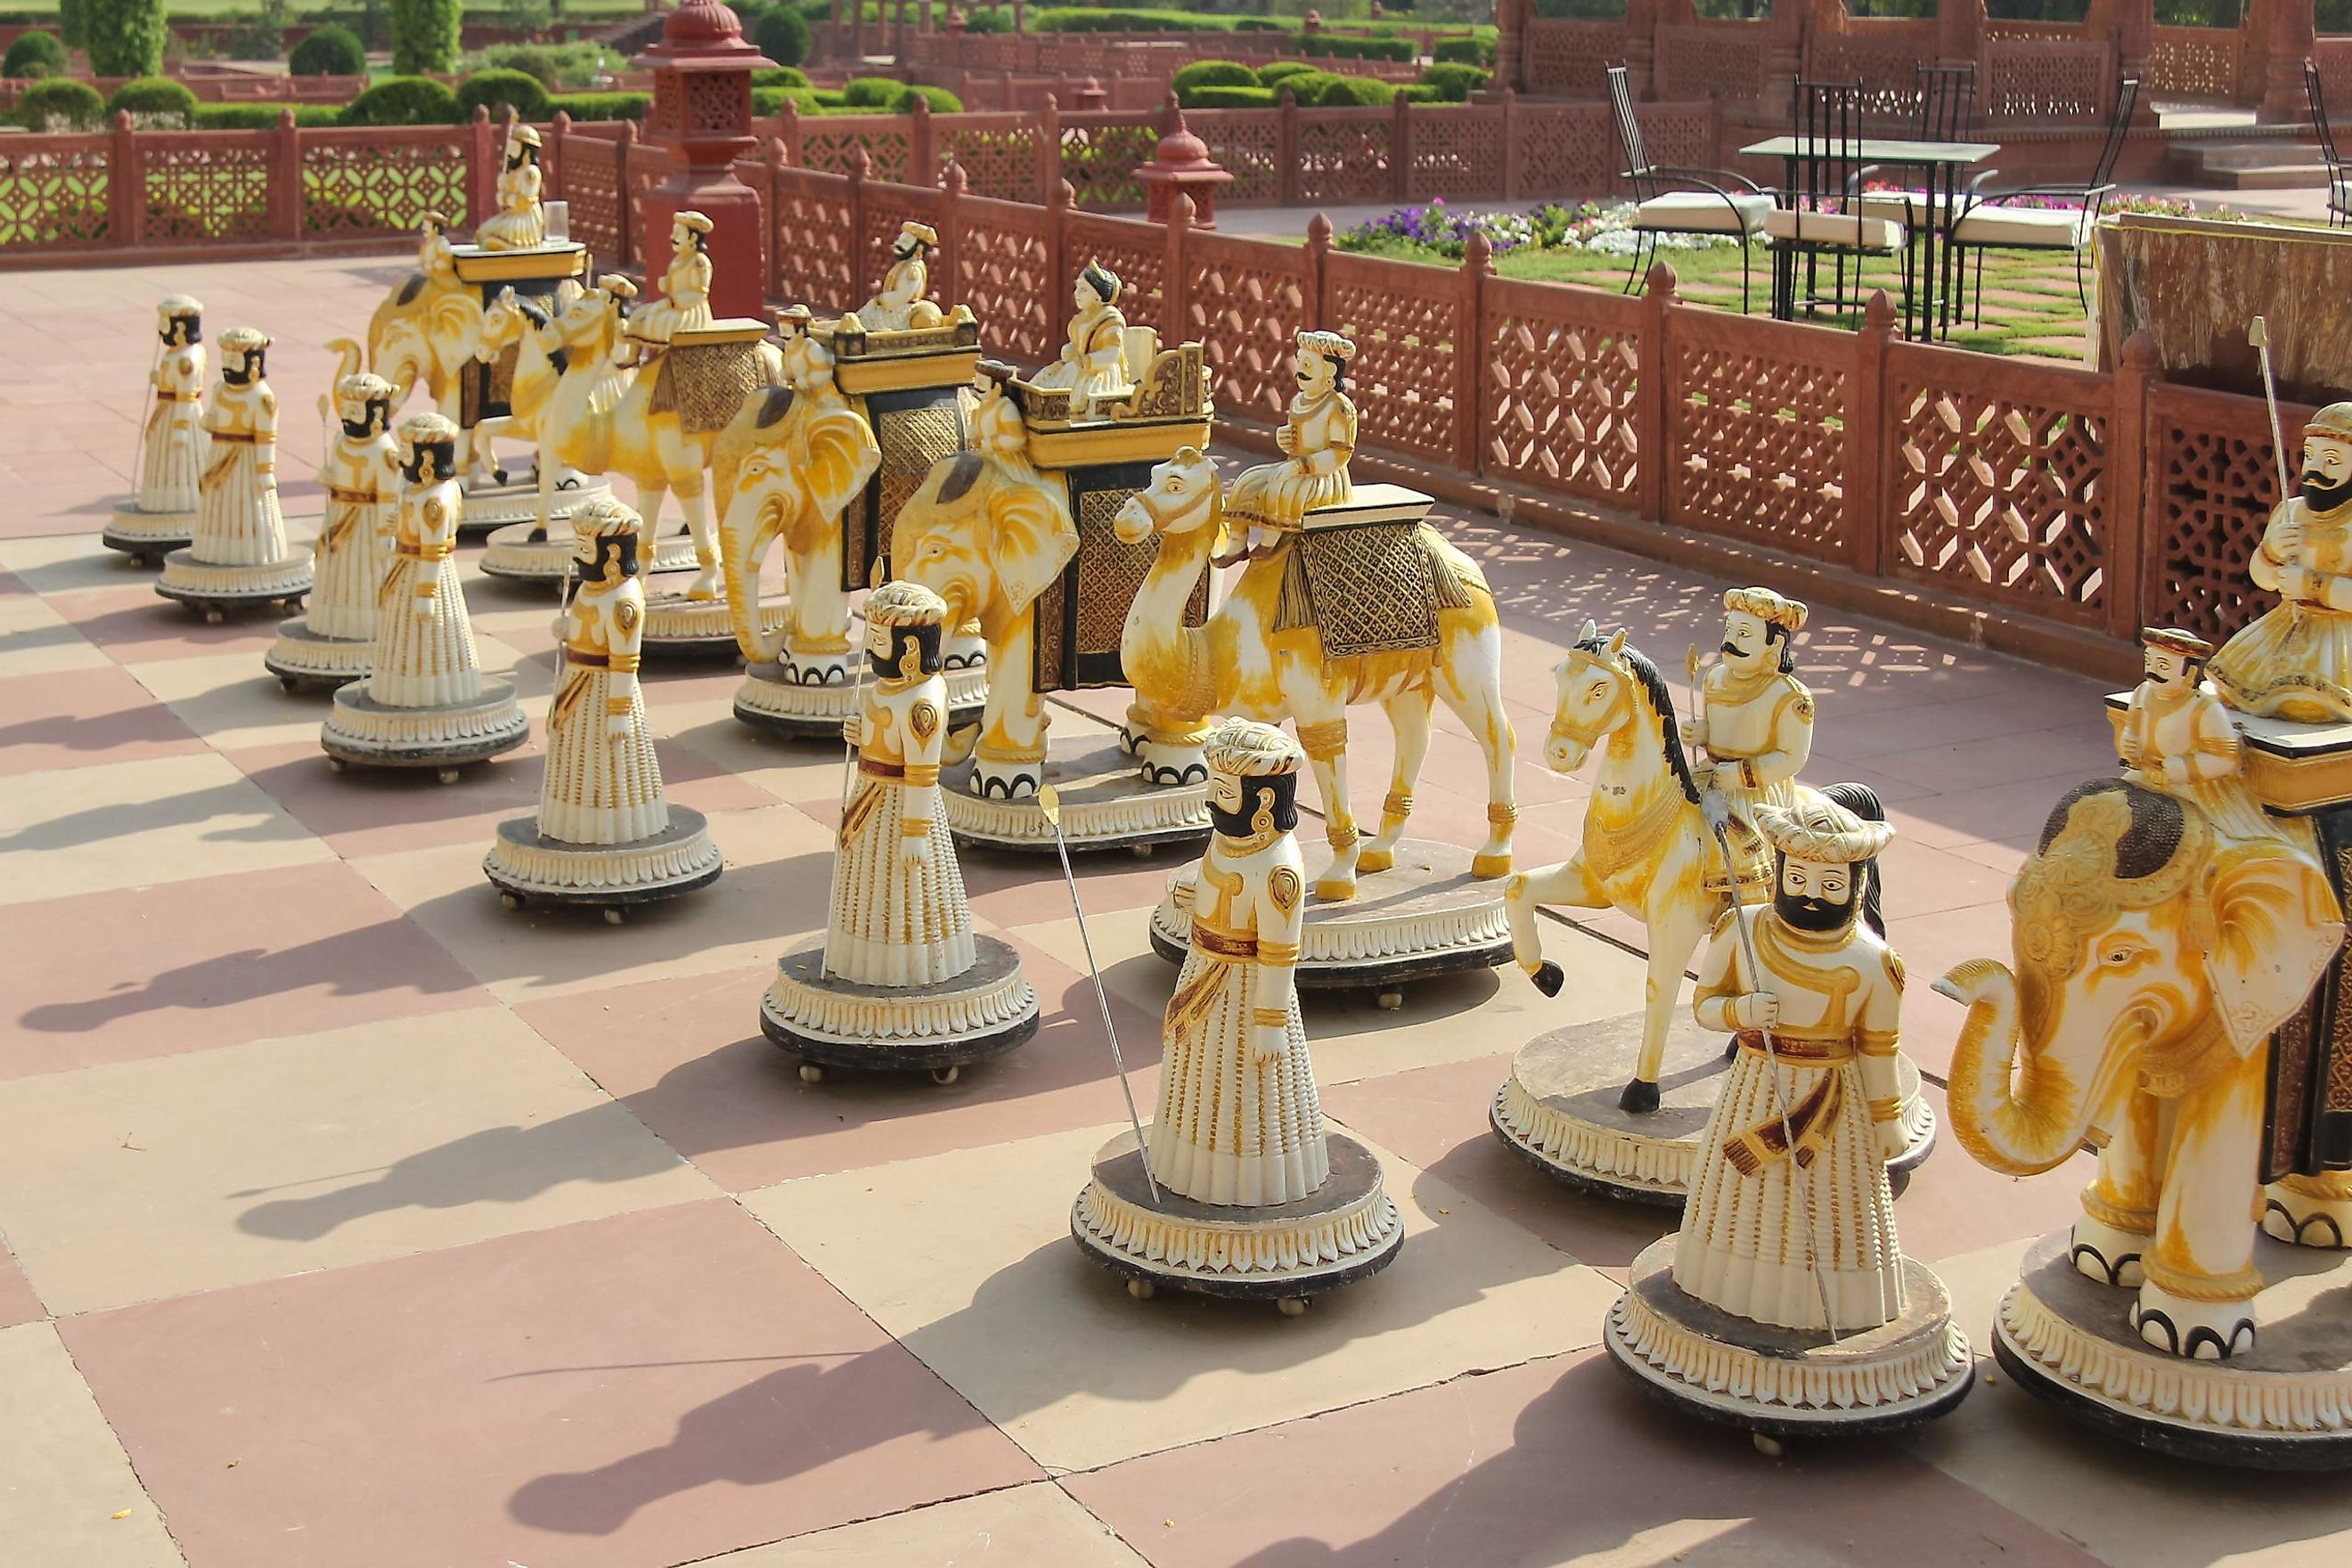 Handcrafted chess figures used in ancient India.